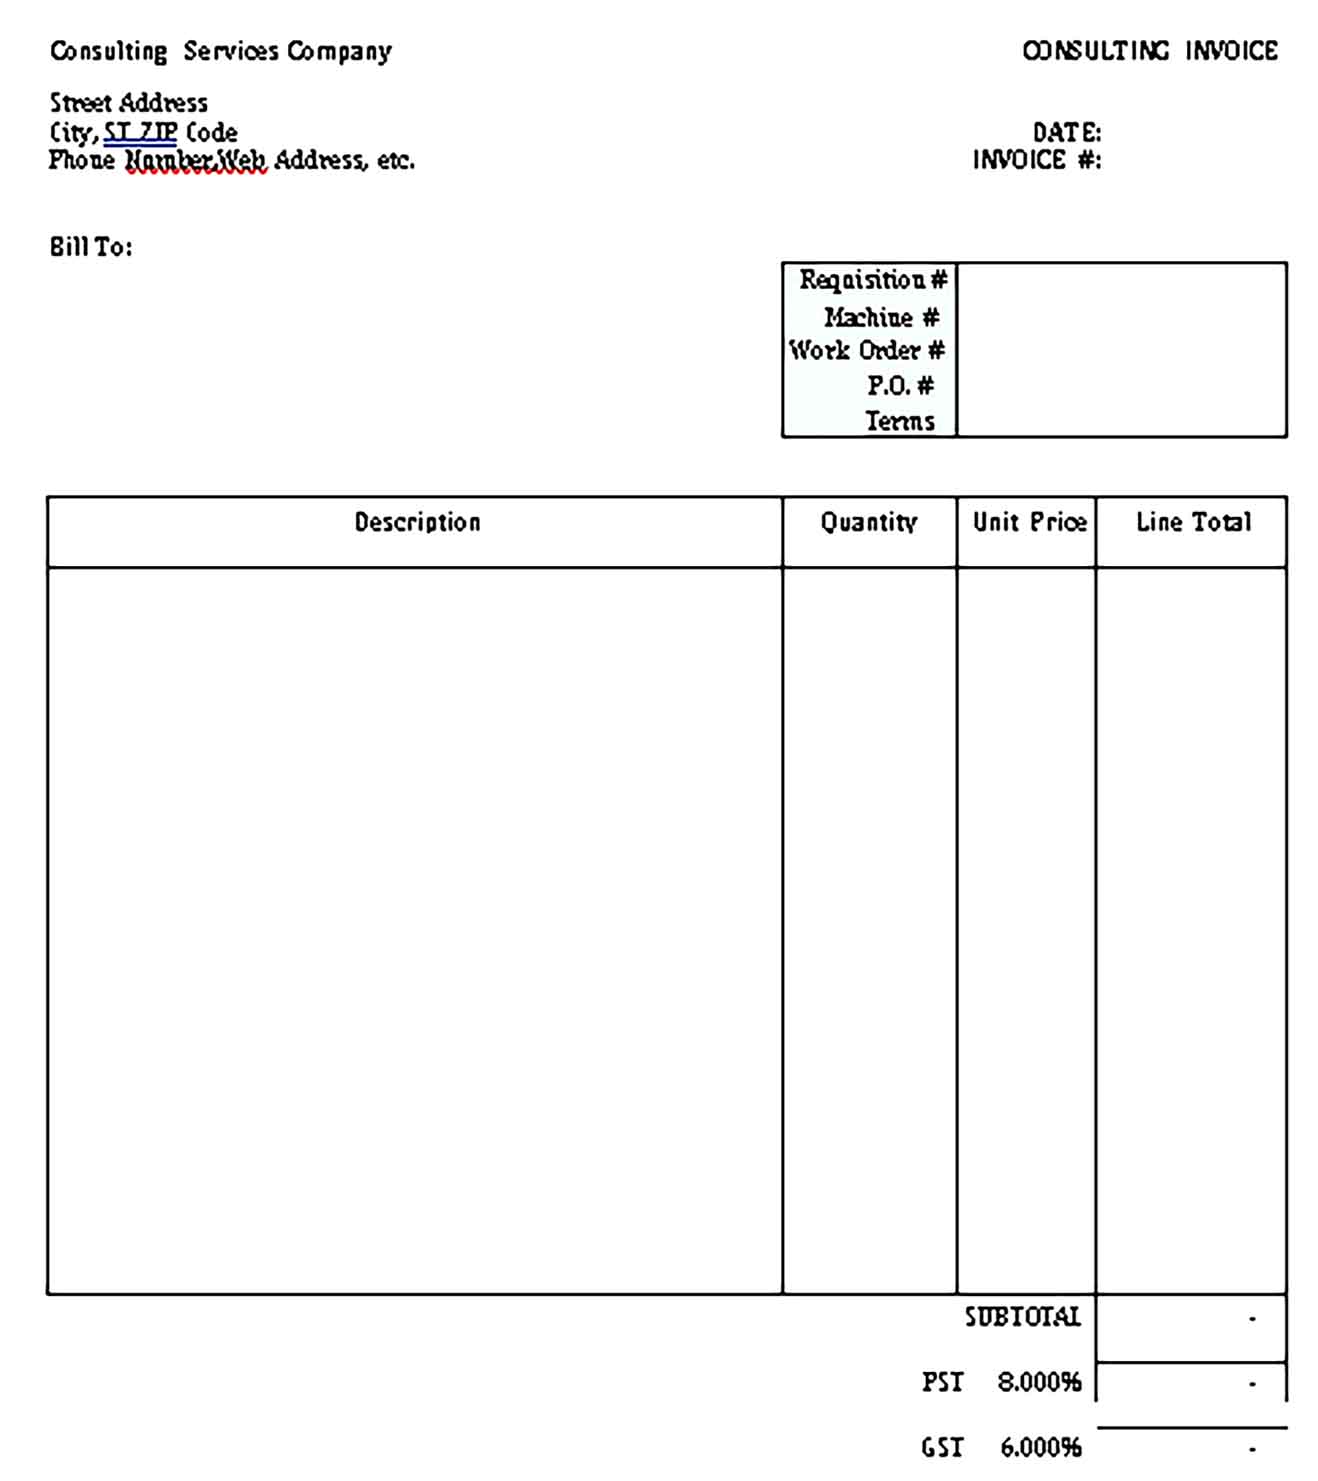 Sample Templates independent consultant invoice